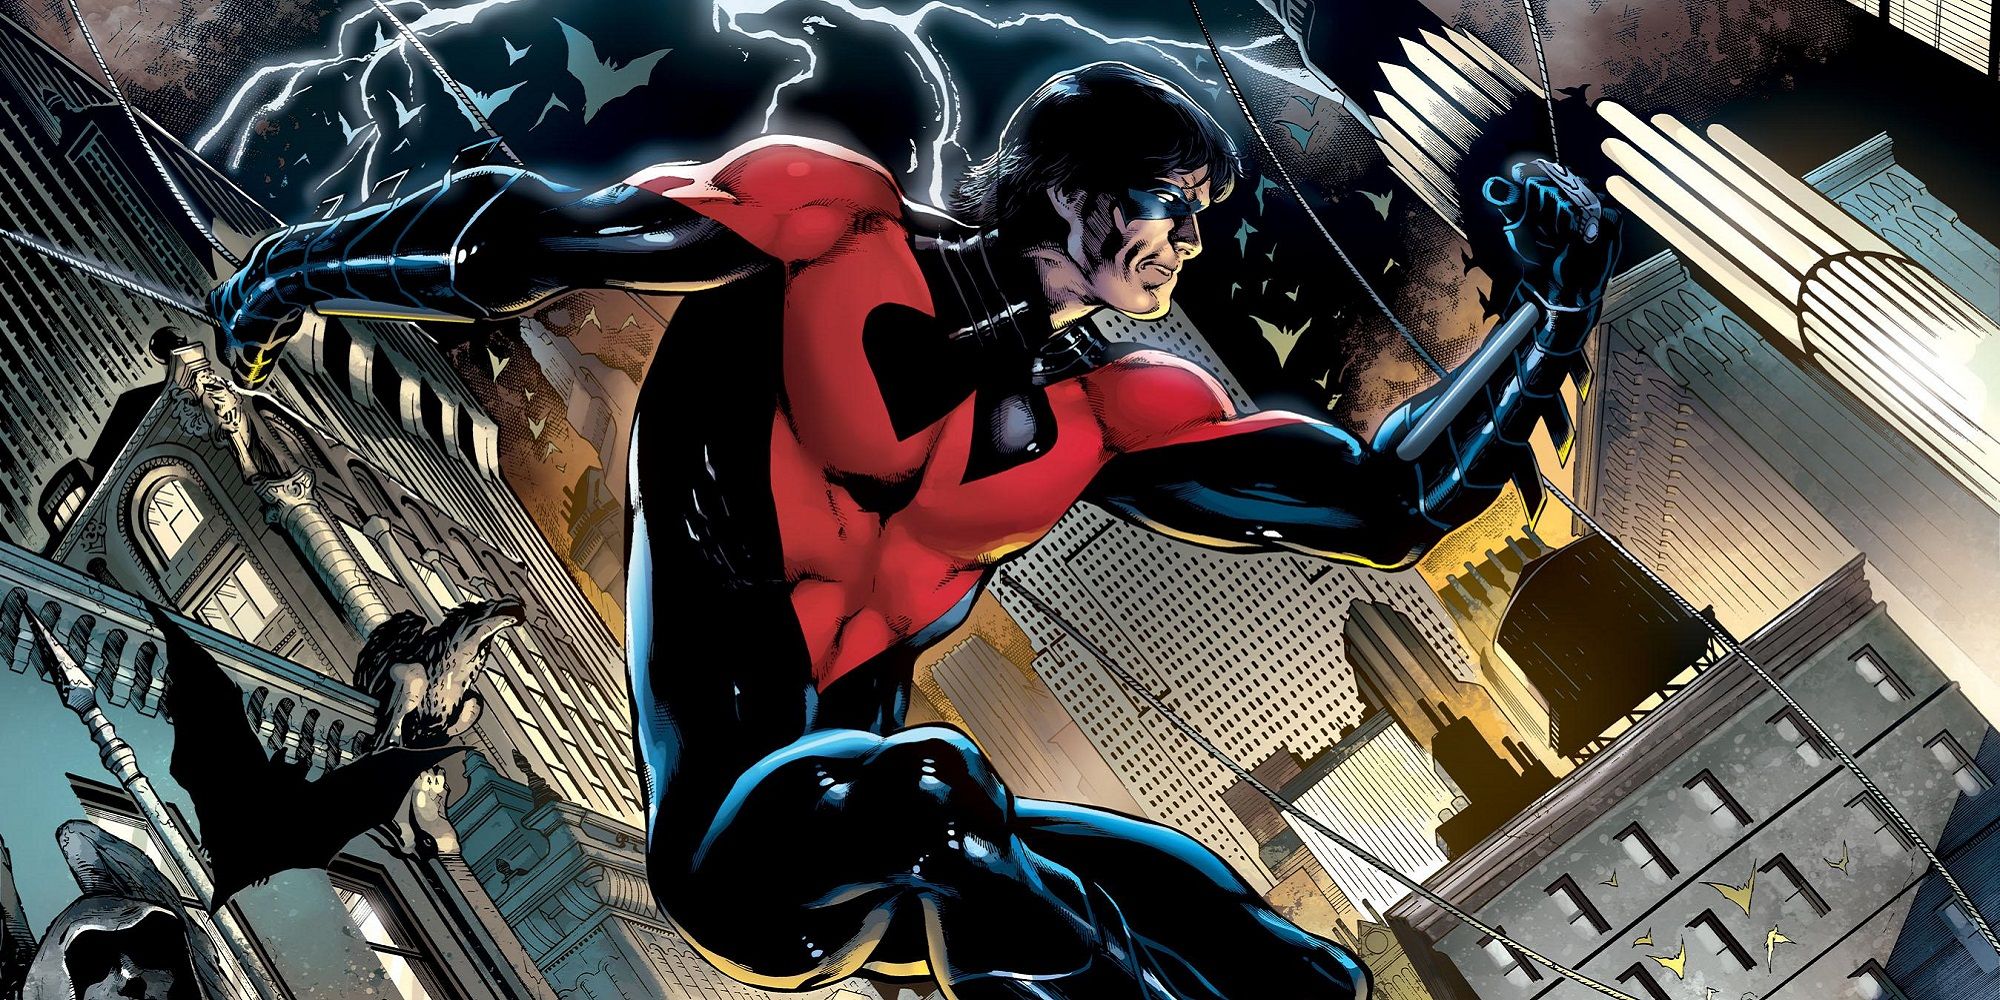 Nightwing jumping from a building in DC Comics